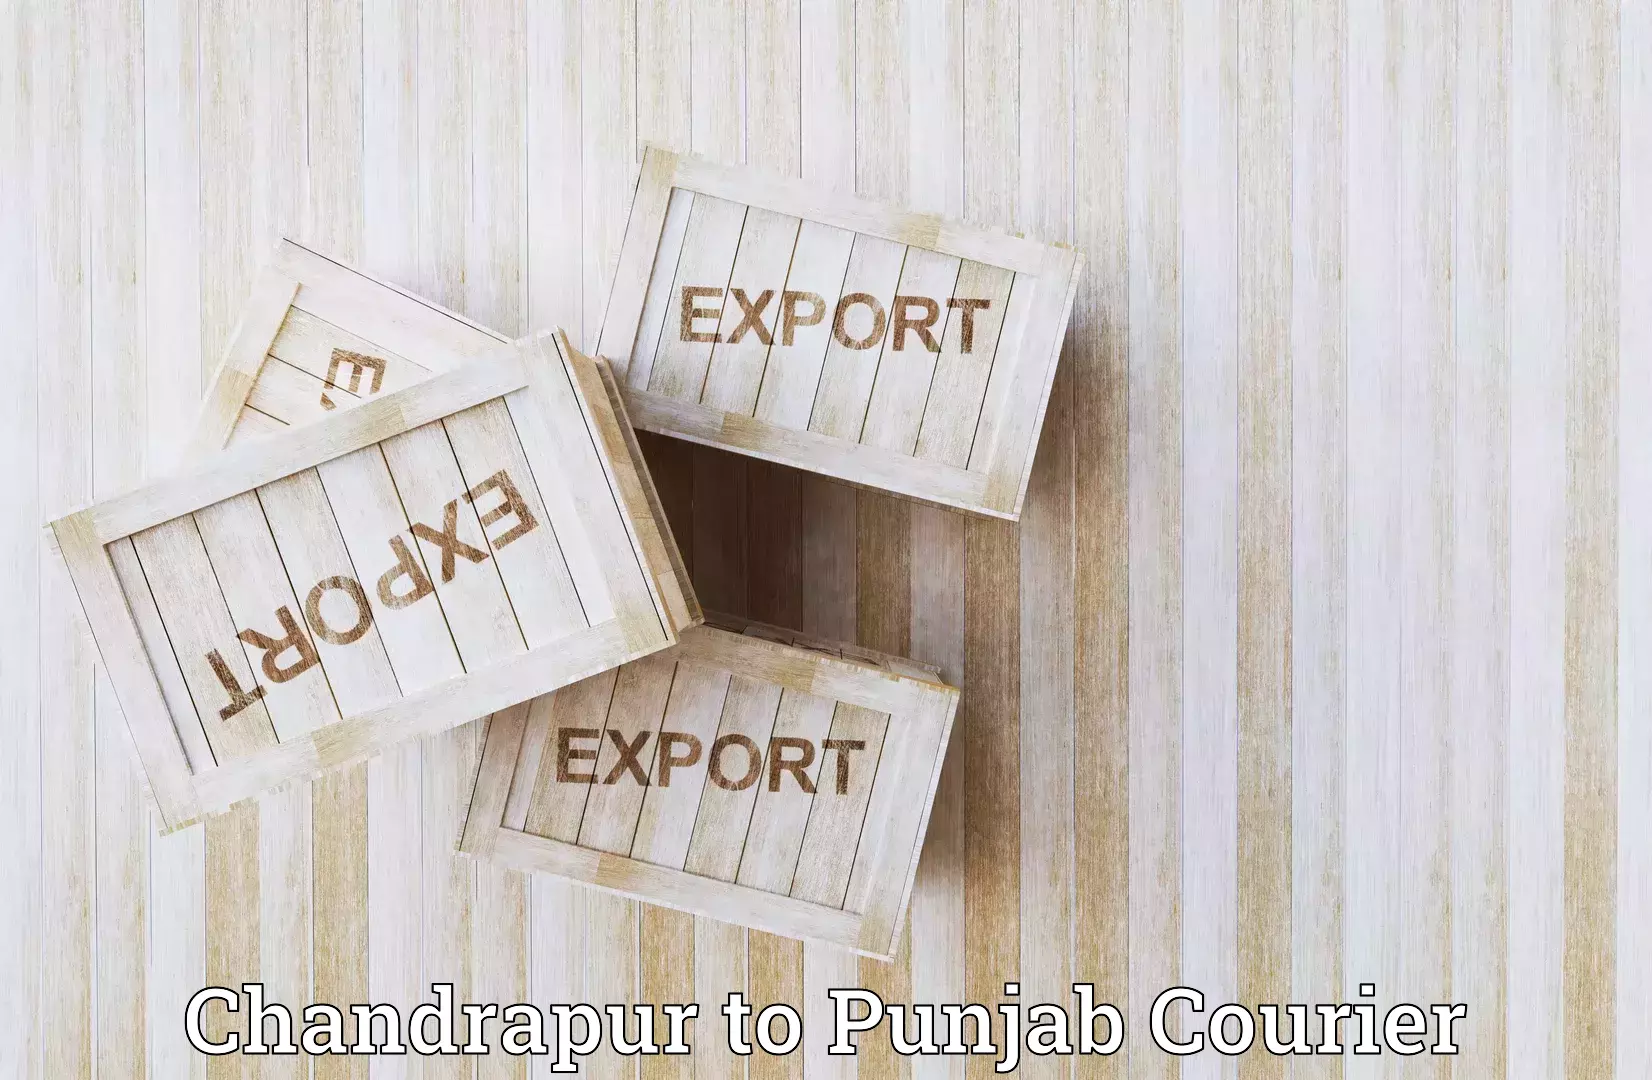 Global shipping solutions Chandrapur to Punjab